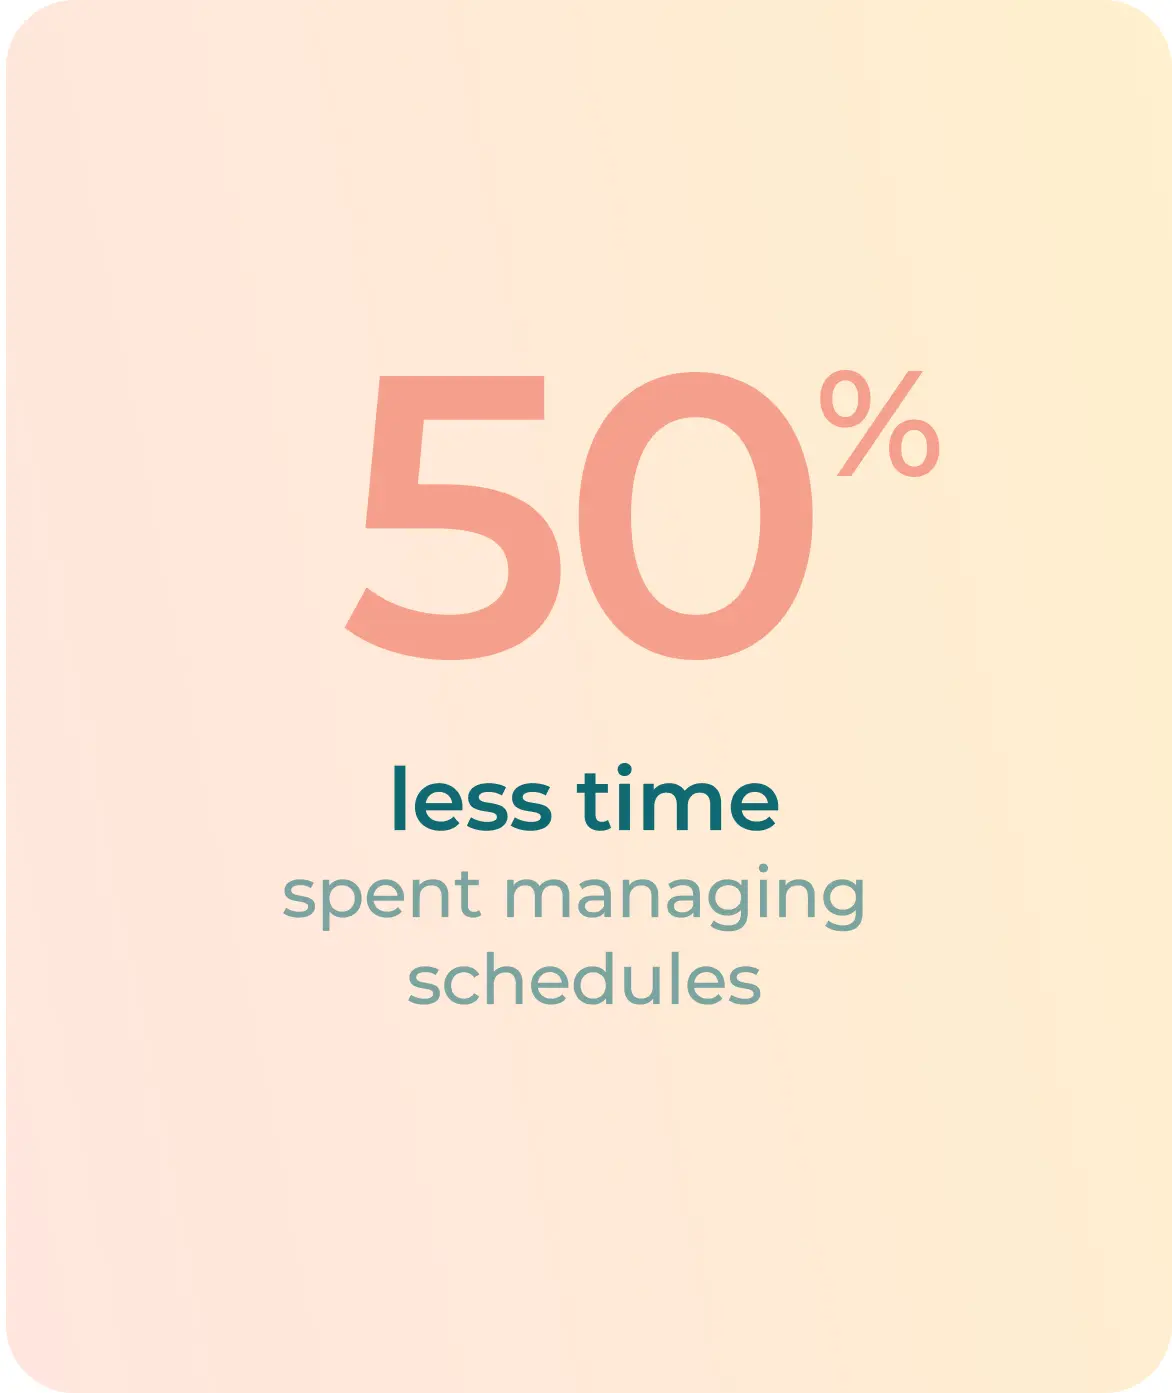 50% less time spent managing schedules